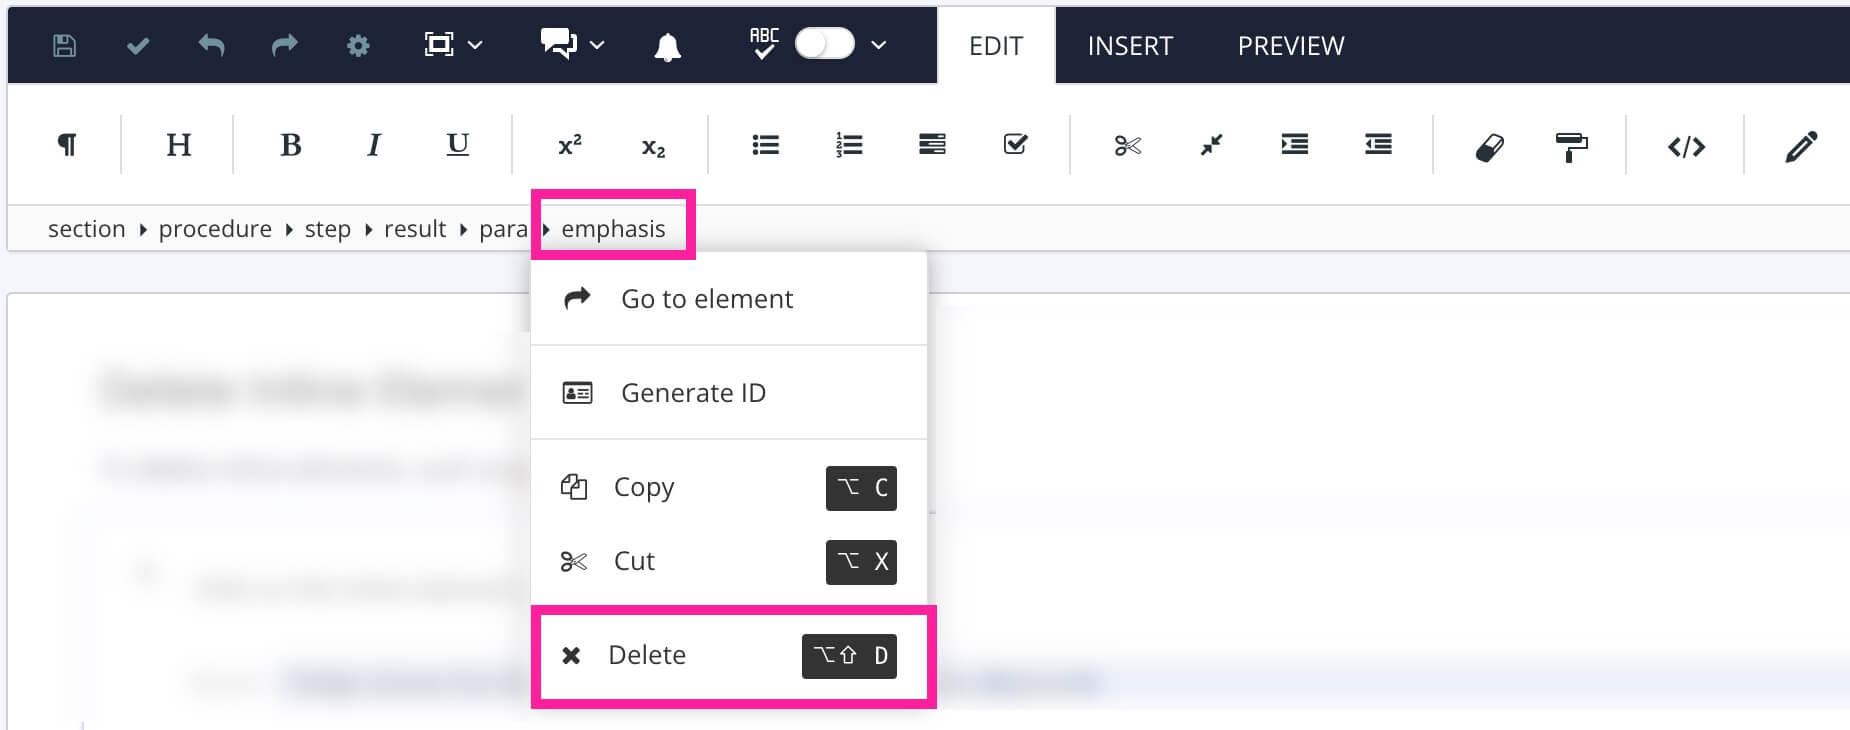 Paligo editor. The emphasis element is selected in the element structure menu. A drop down menu is shown and the delete option is highlighted.